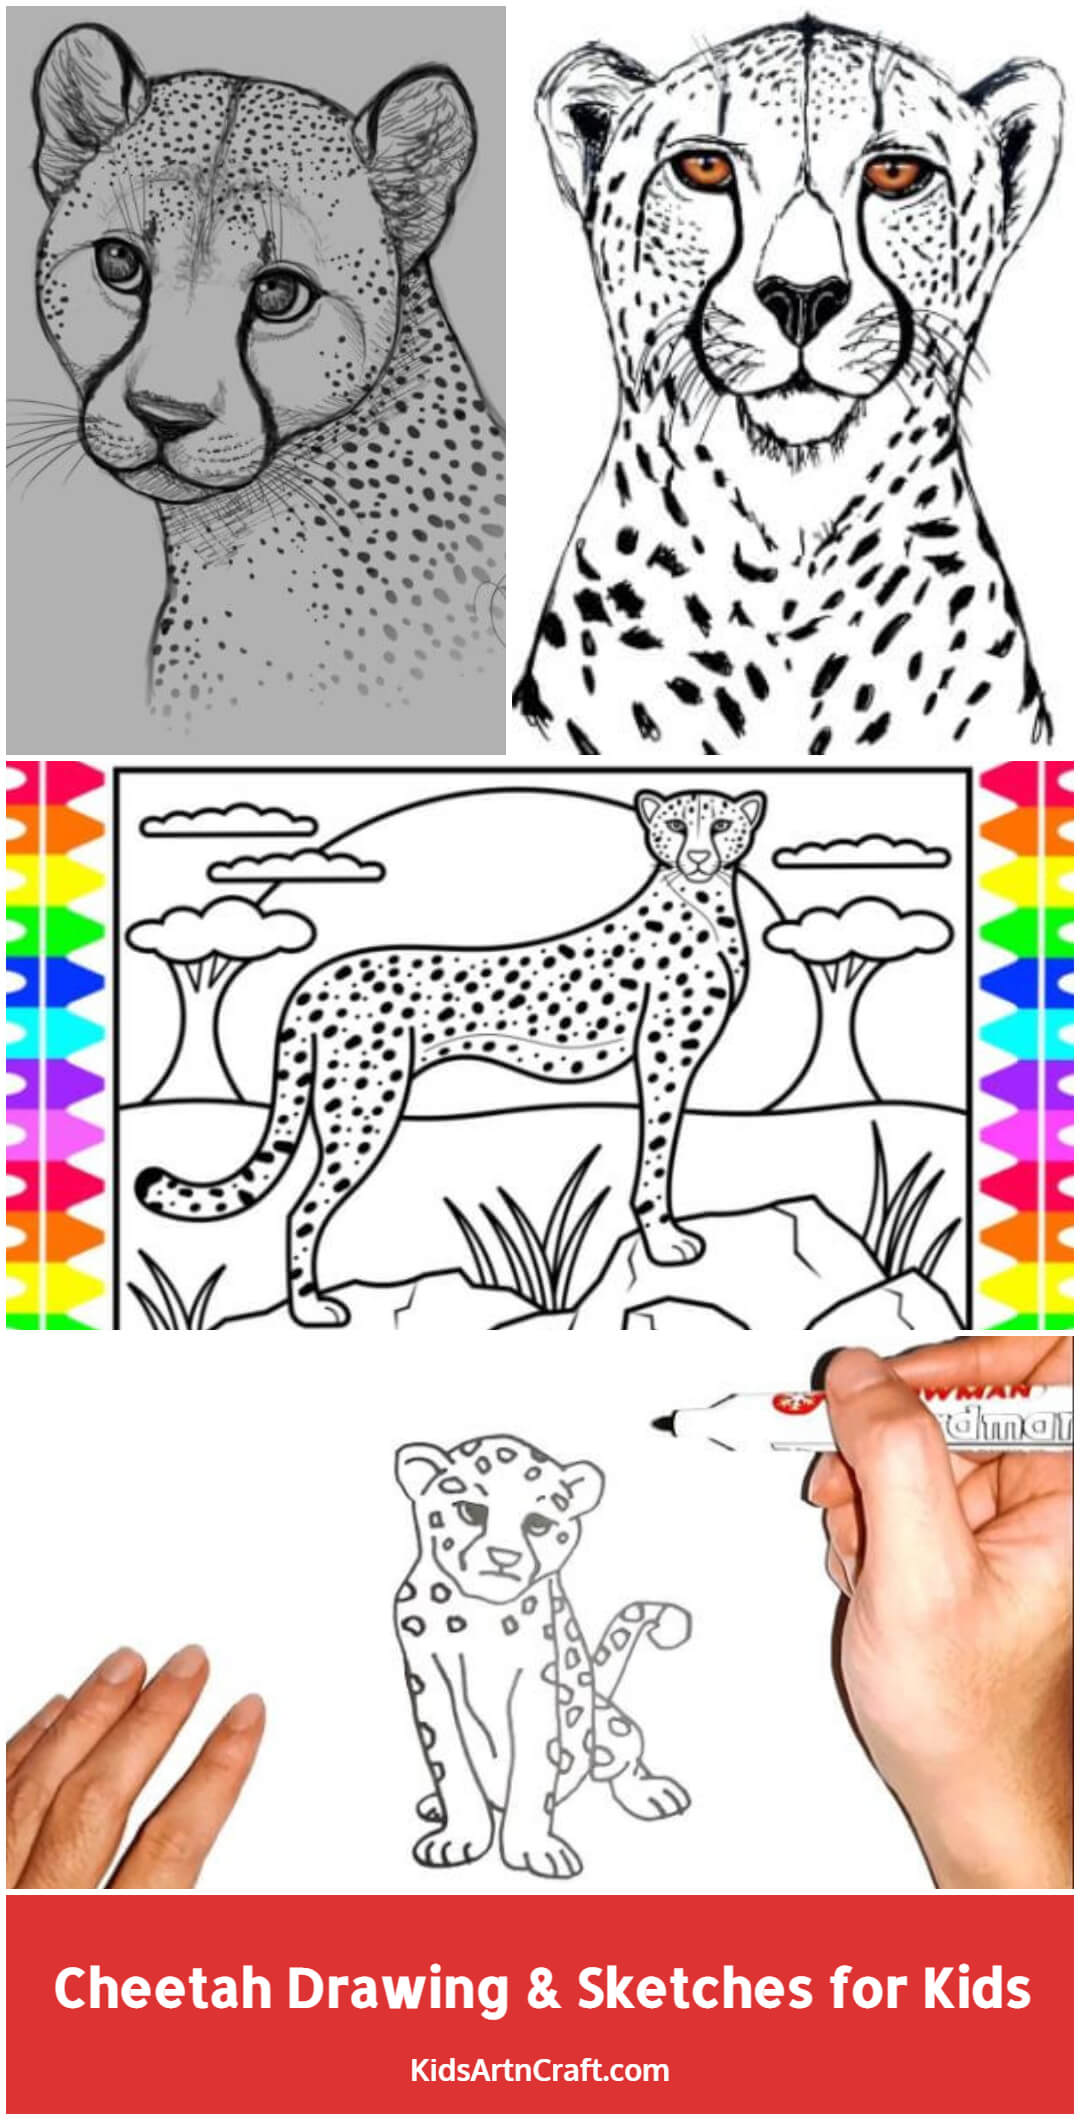 Cheetah Drawing & Sketches for Kids